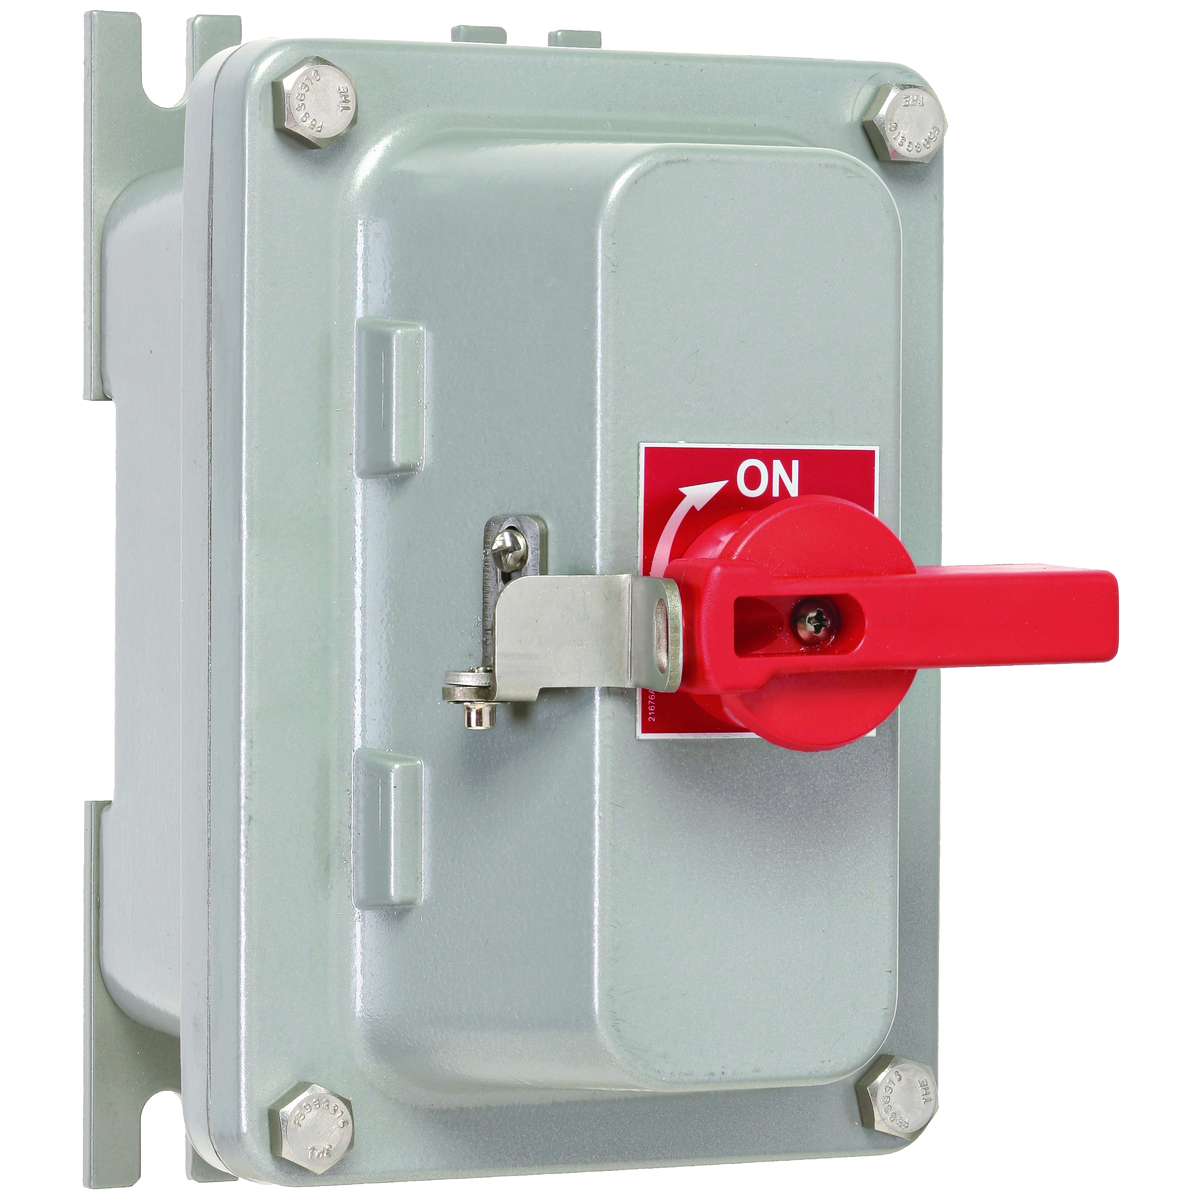 B7NFD SERIES - ALUMINUM FEED-THRU COMPACT NON-FUSIBLEDISCONNECT ENCLOSURE WITH ABB SWITCH - CONDUIT HUBSIZE 1 IN NPT - 30 AMPS/3 PHASE/600 VOLTS